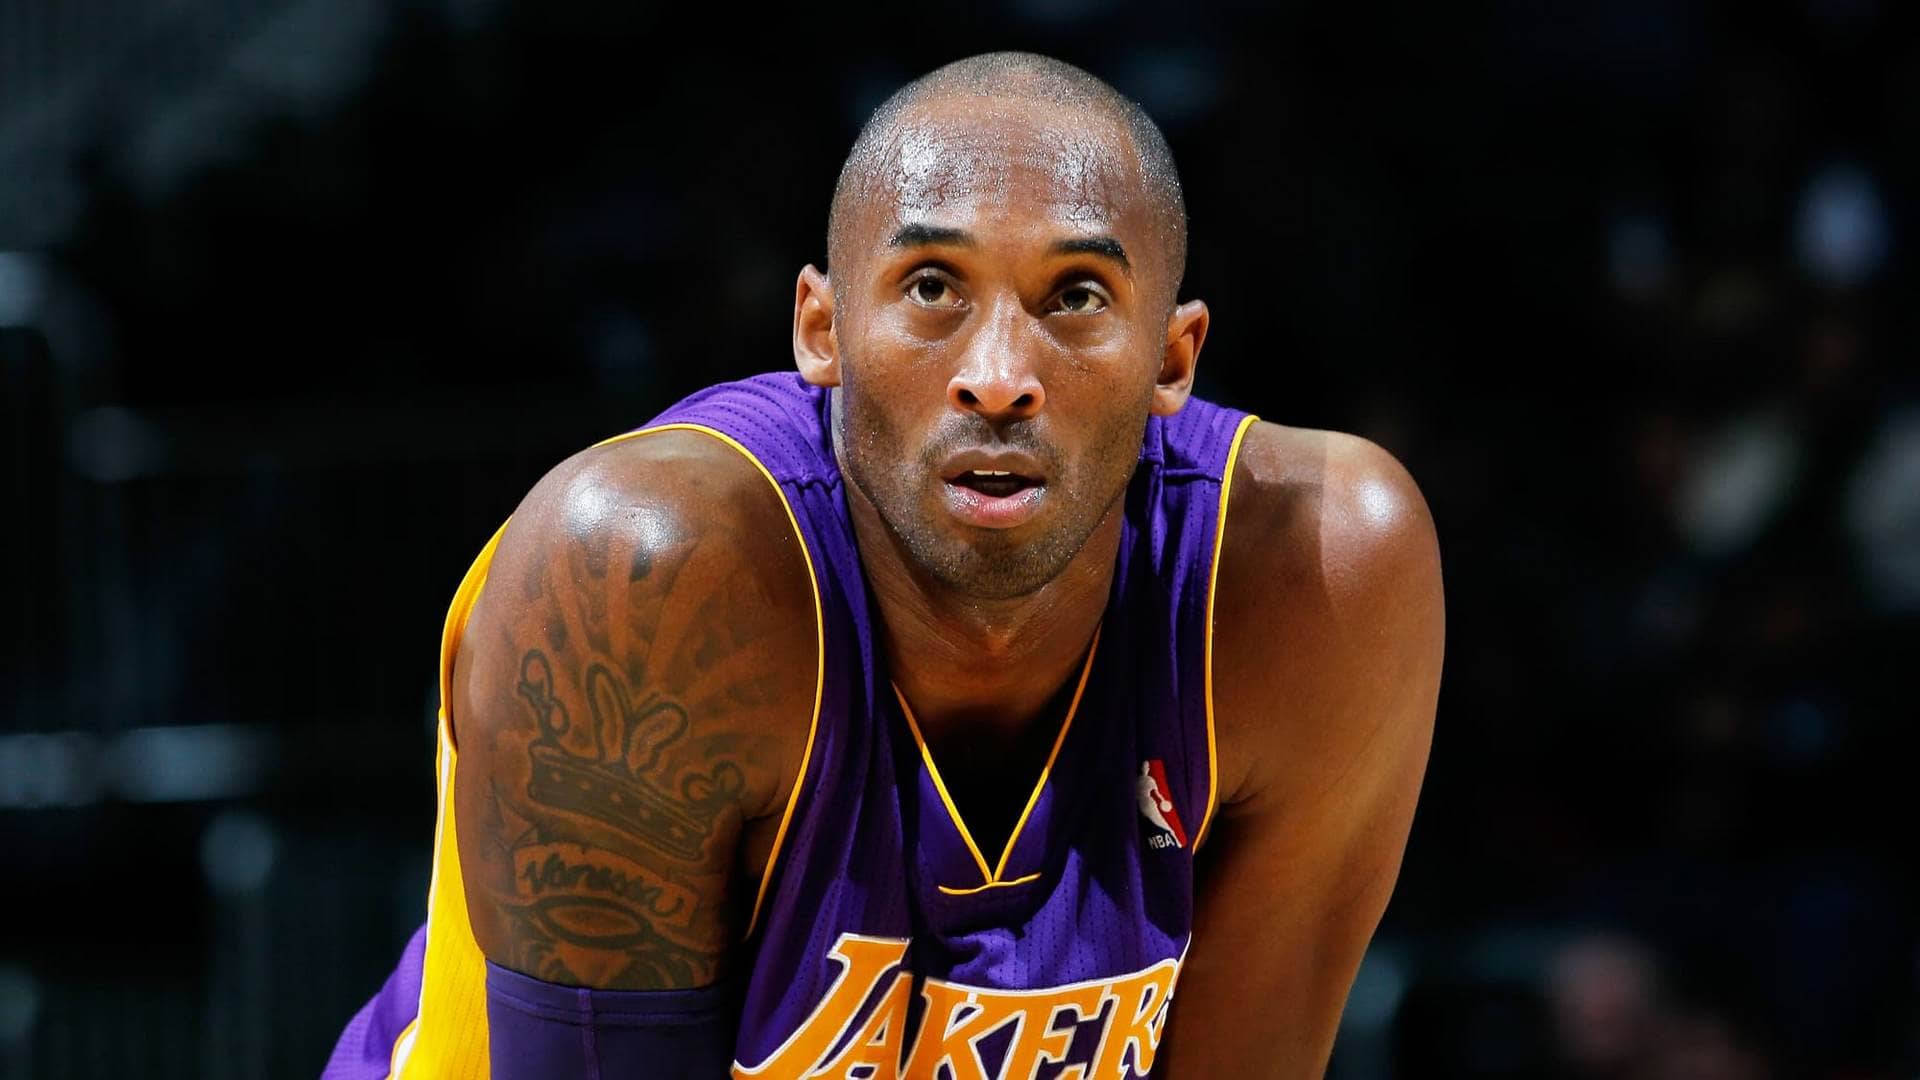 Top 20 NBA Career Scoring Leaders Of All Time In The World - Kobe Bryant